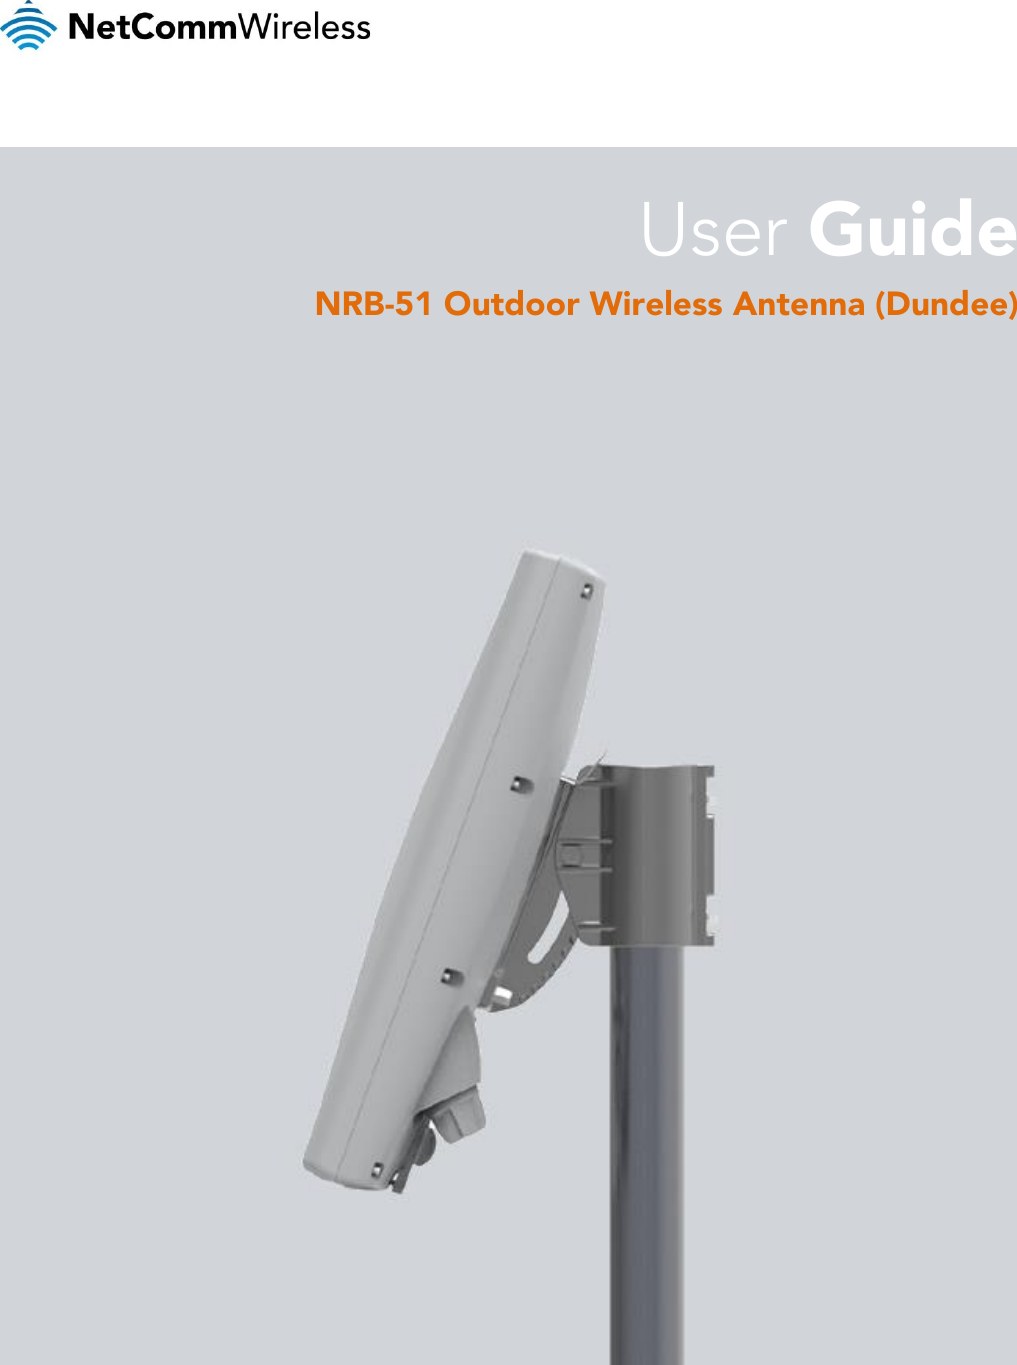                           User Guide NRB-51 Outdoor Wireless Antenna (Dundee) 